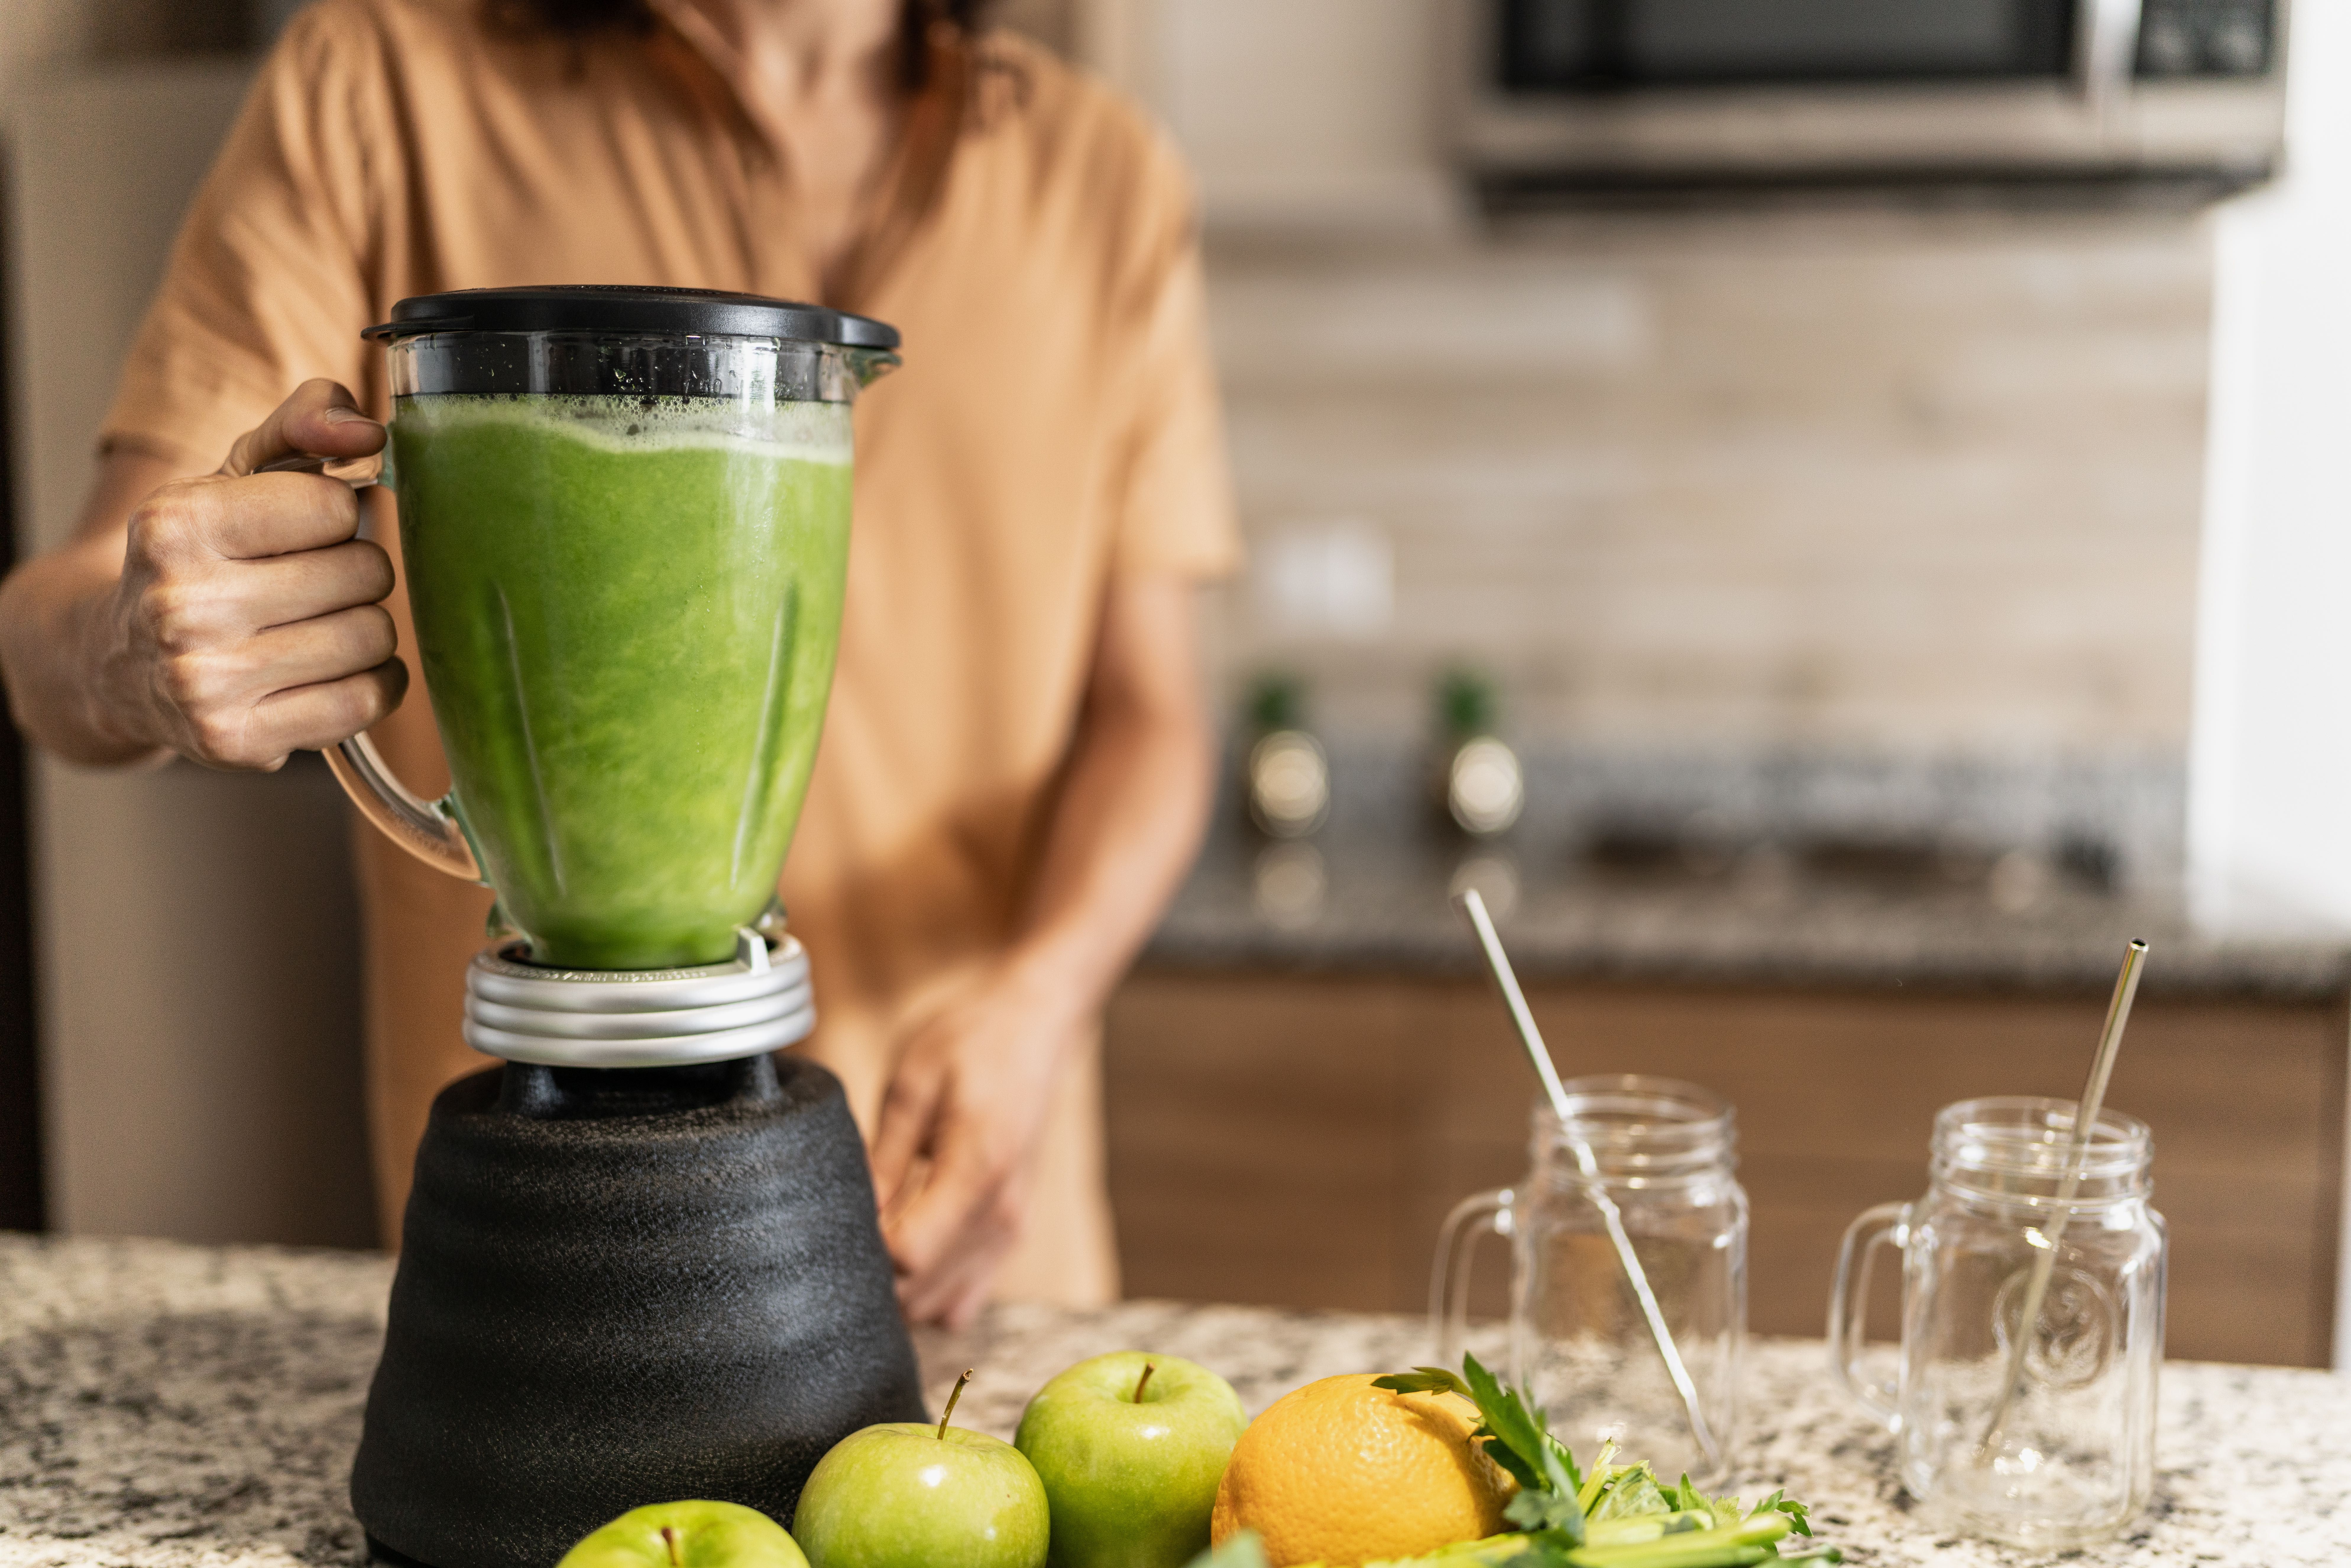 10 best Nutribullet recipes to supercharge your daily nutrition